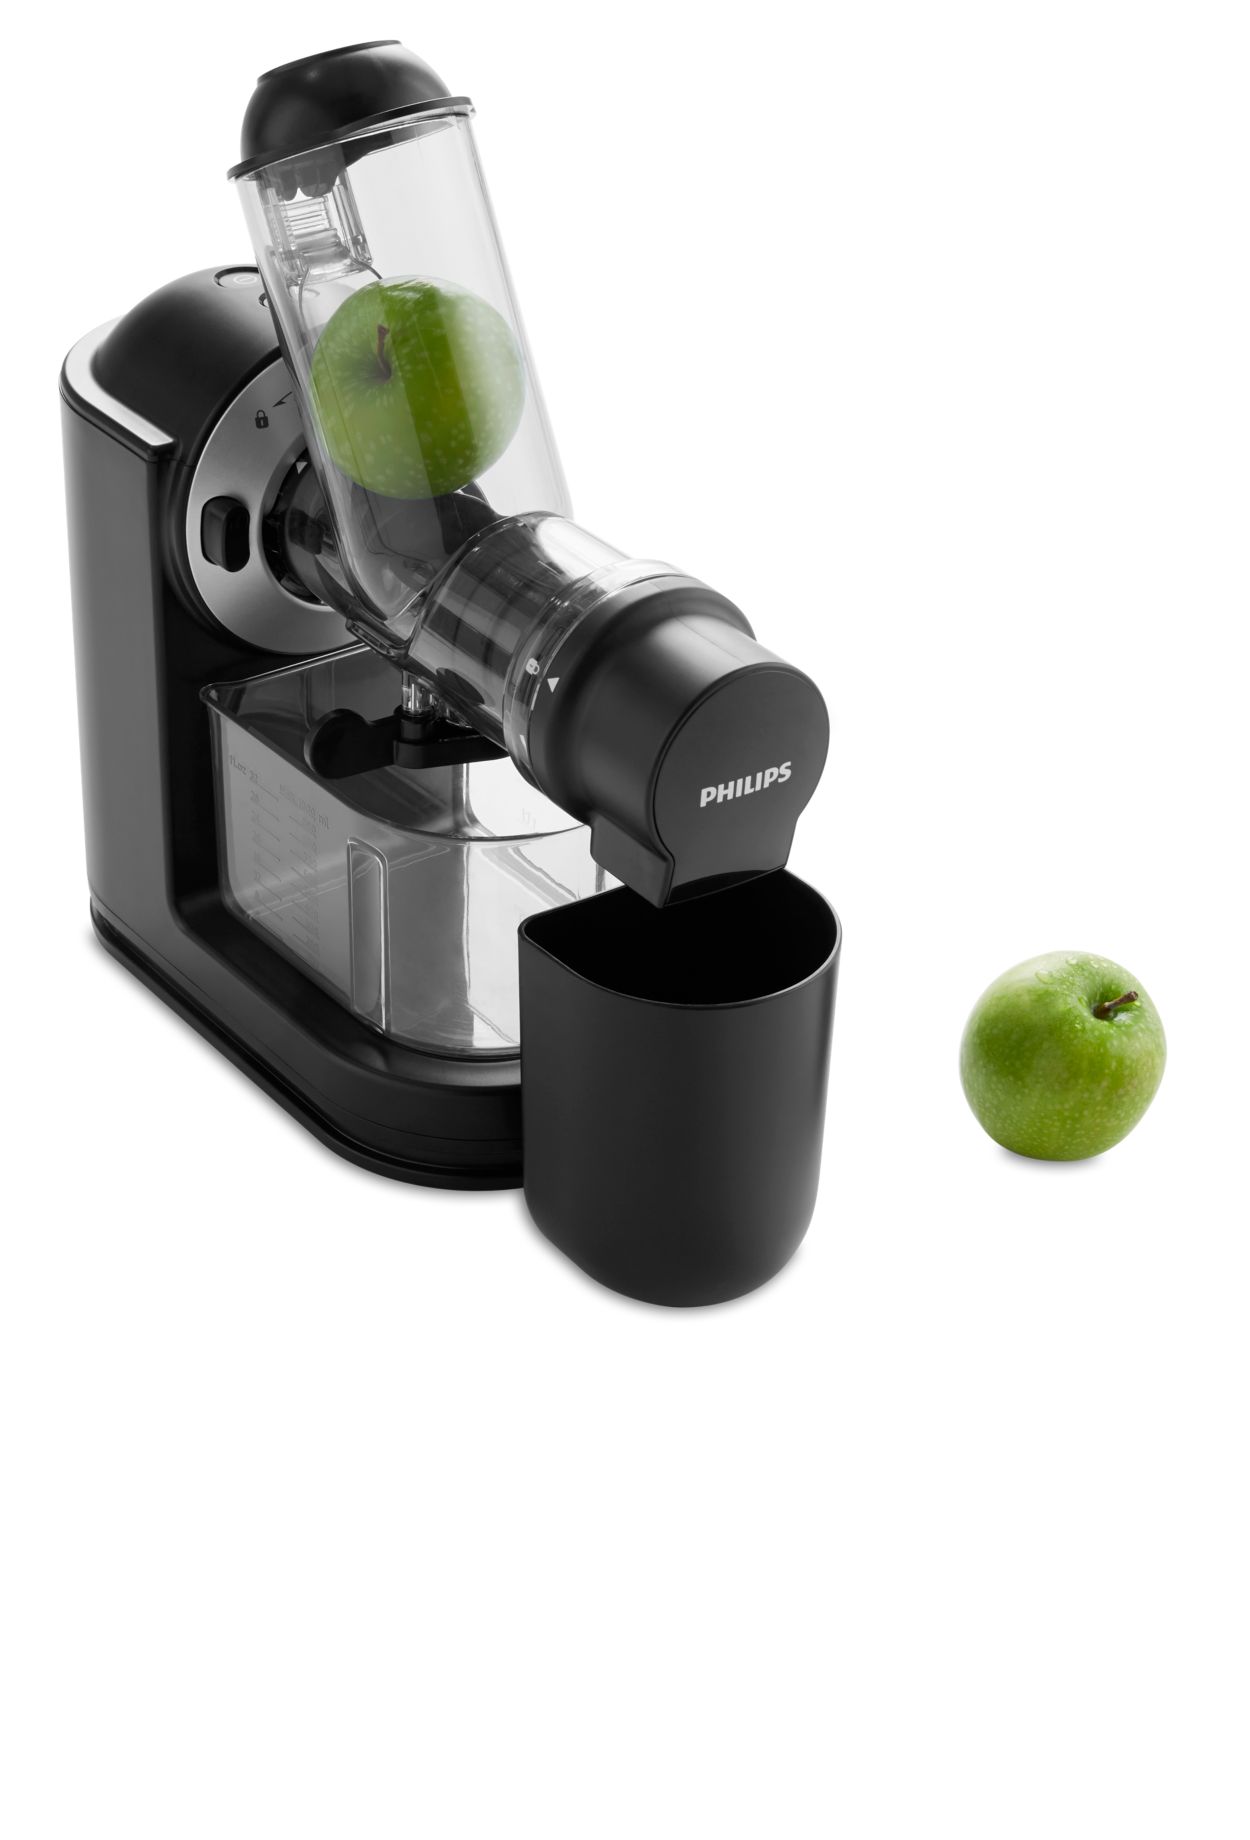 Viva Collection Juicer Philips Slow HR1889/70 